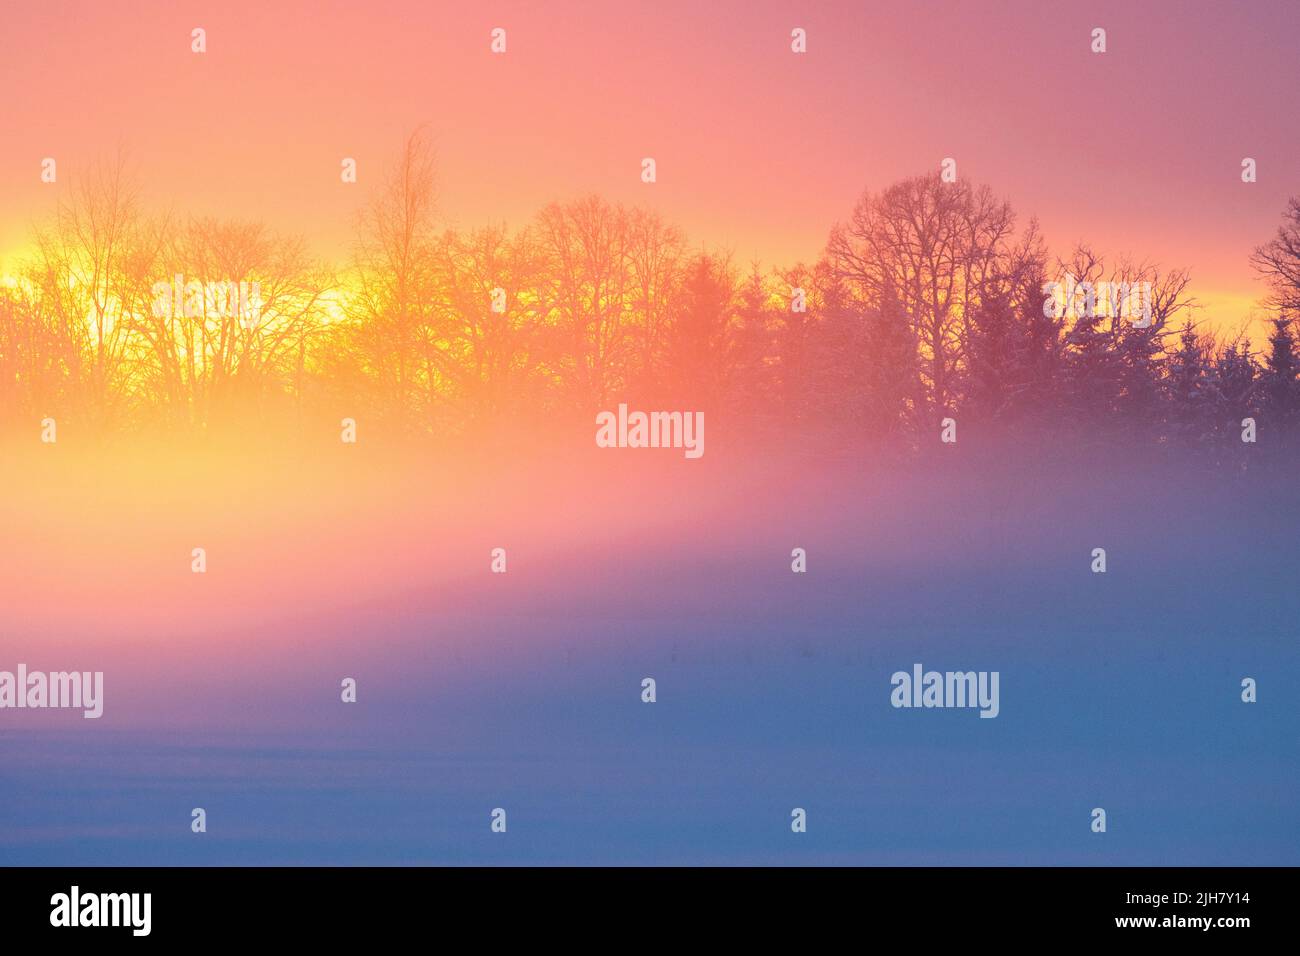 A wintry sunset with vibrant light reflecting on rising mist Stock Photo